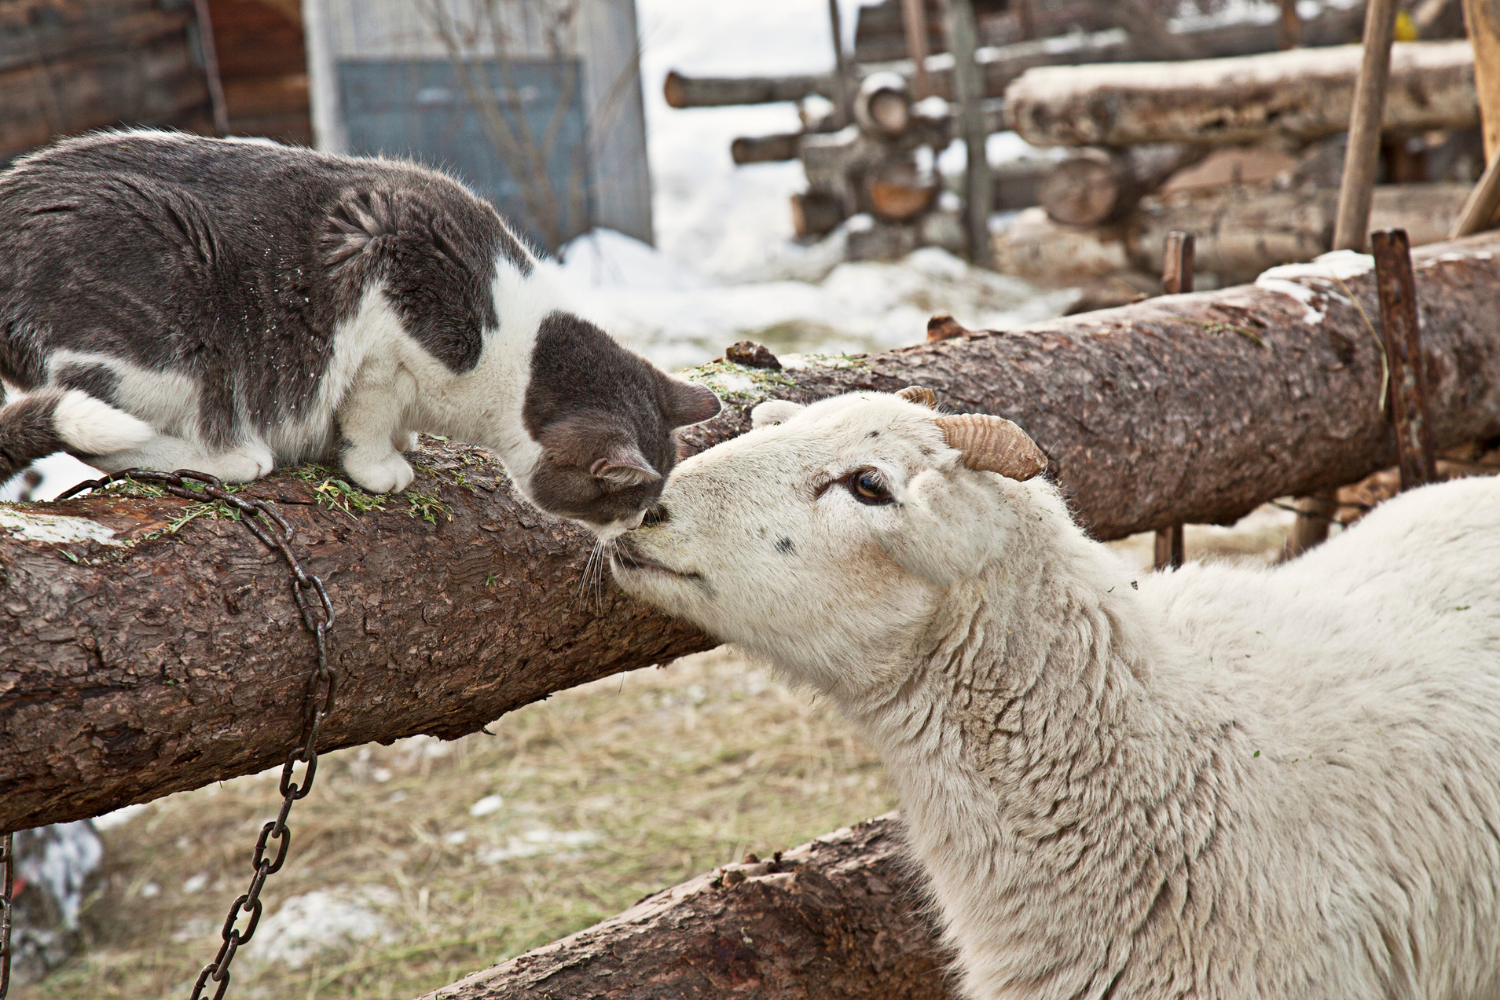 Internet Obsessed With Cats Herding Flock of Sheep: ‘Heaven’